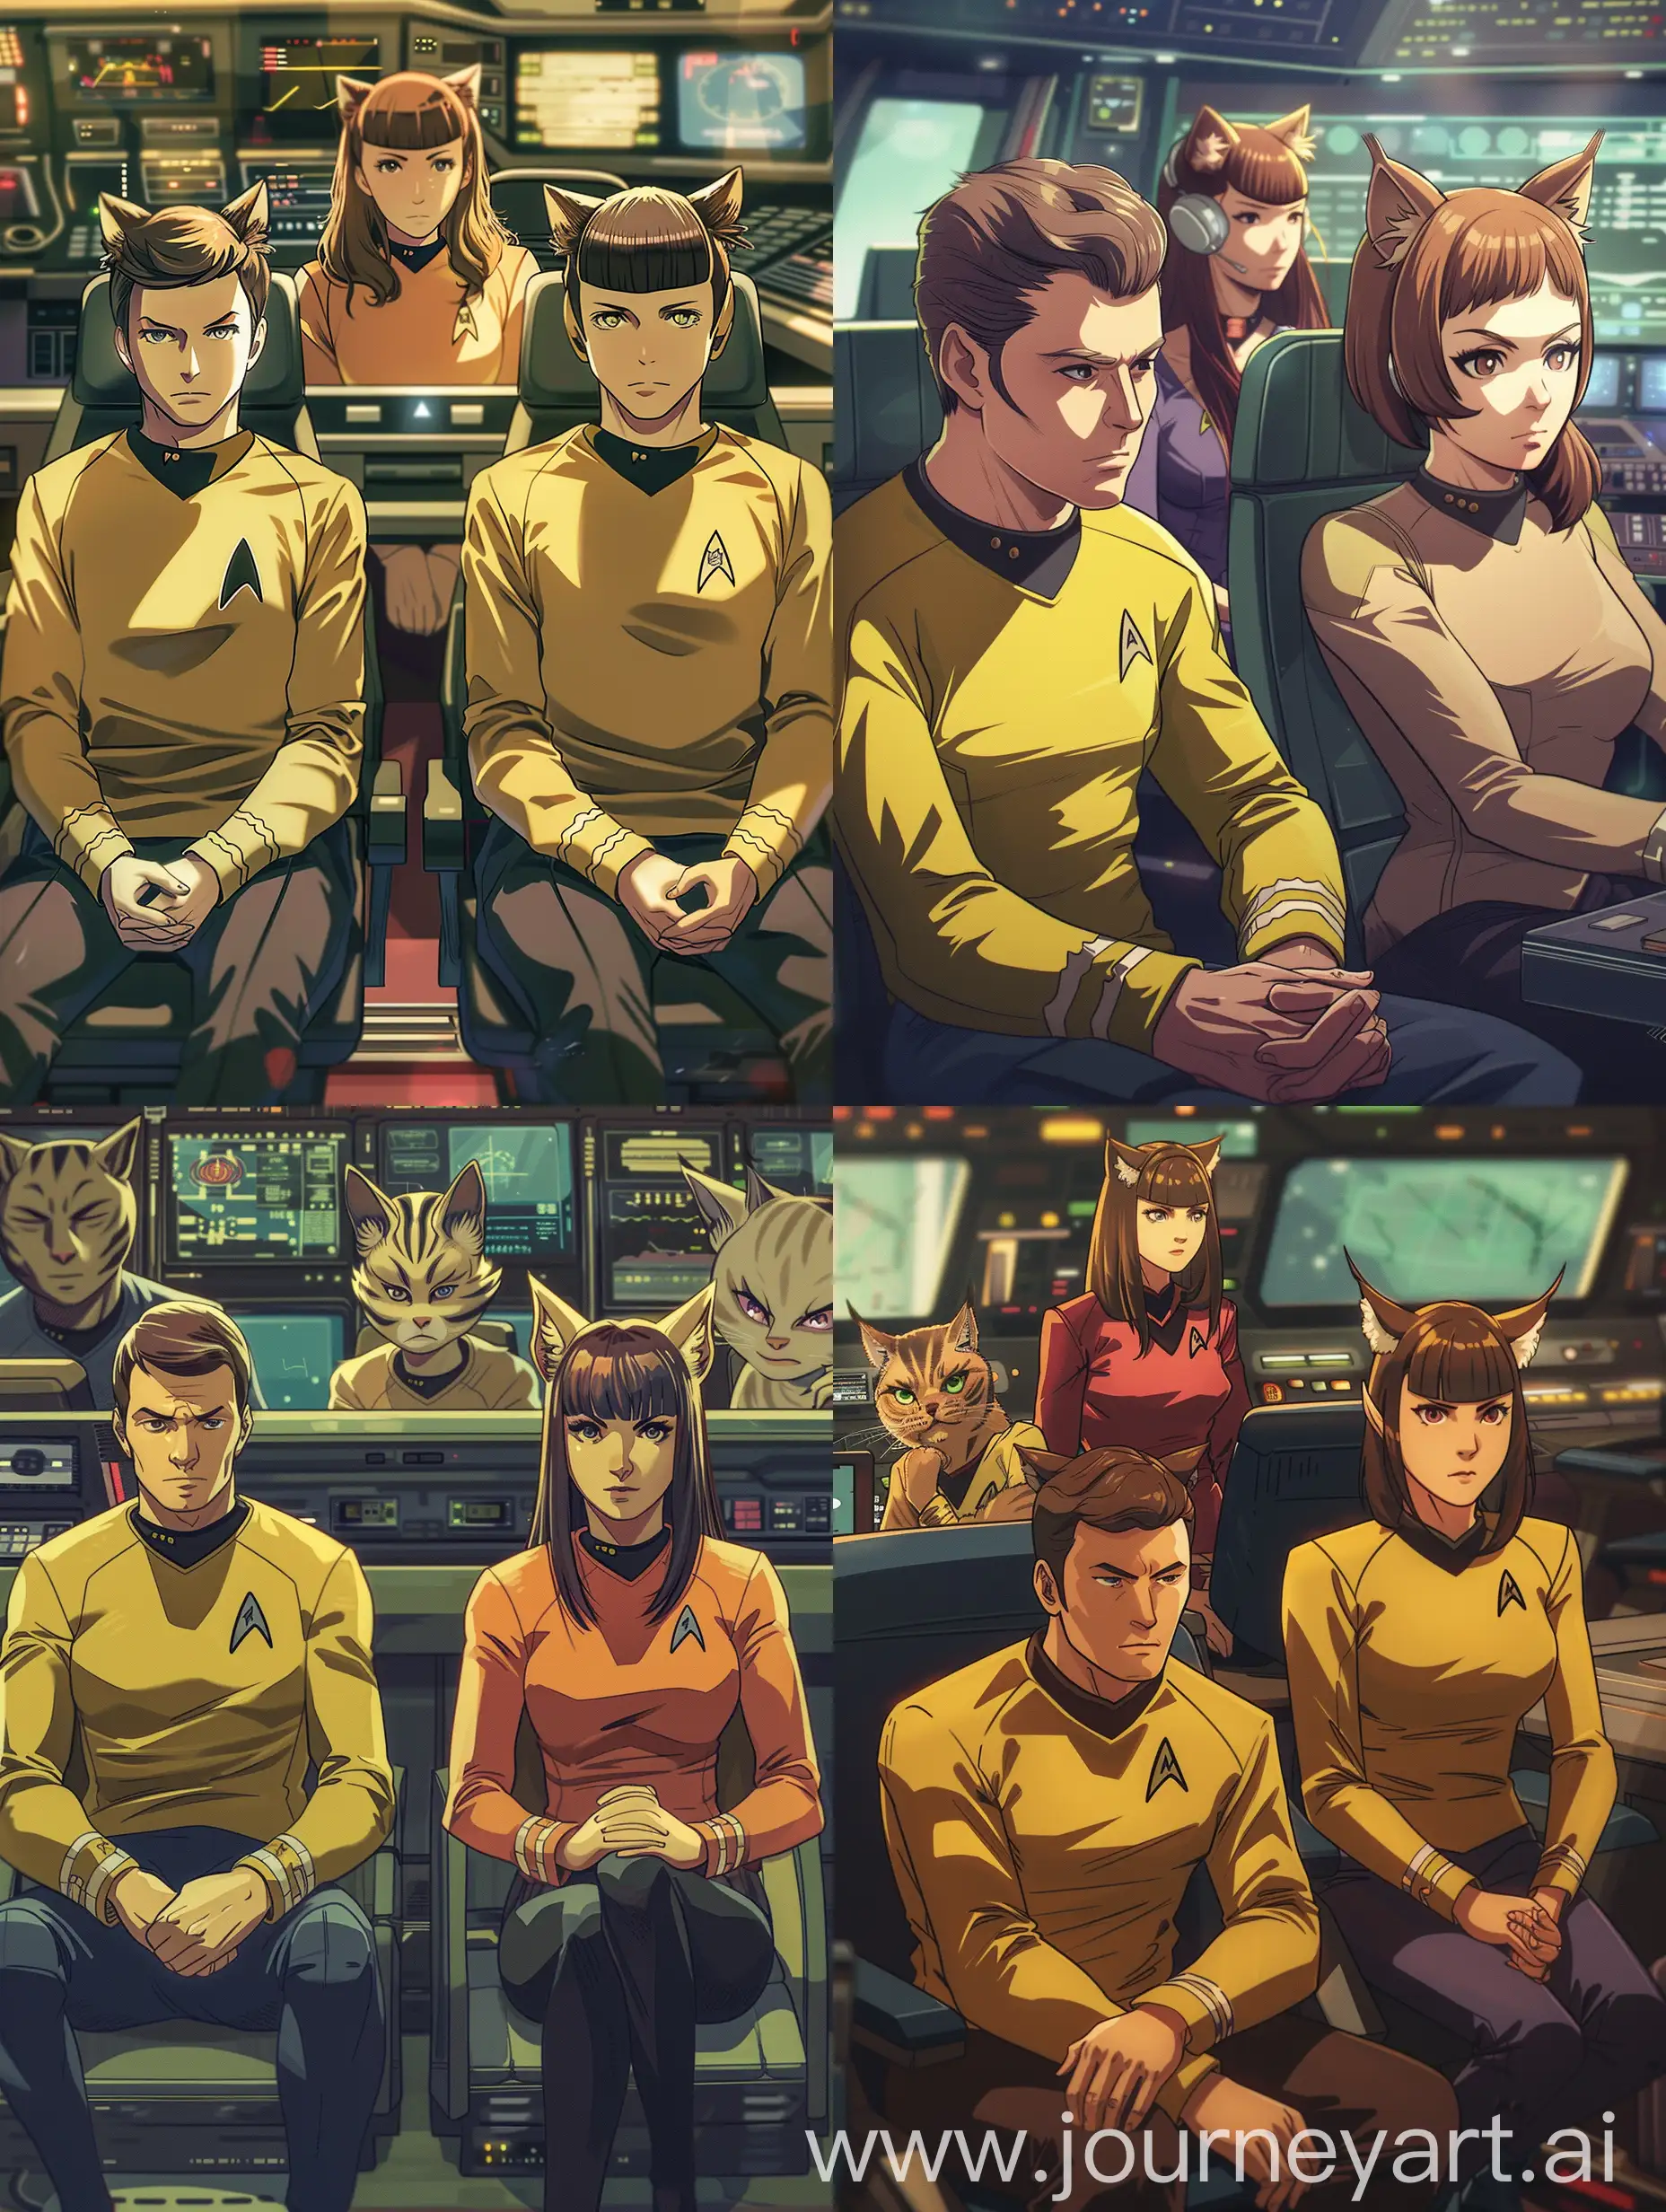 The crew of the original USS Enterprise; Captain Kirk, Mr. Spock, and McCoy, sitting in the bridge. All three of them are younger, anime-styled, with cat ears.  They have serious looks on their faces. Behind them a catgirl Uhura is working the comms looking nervous. 